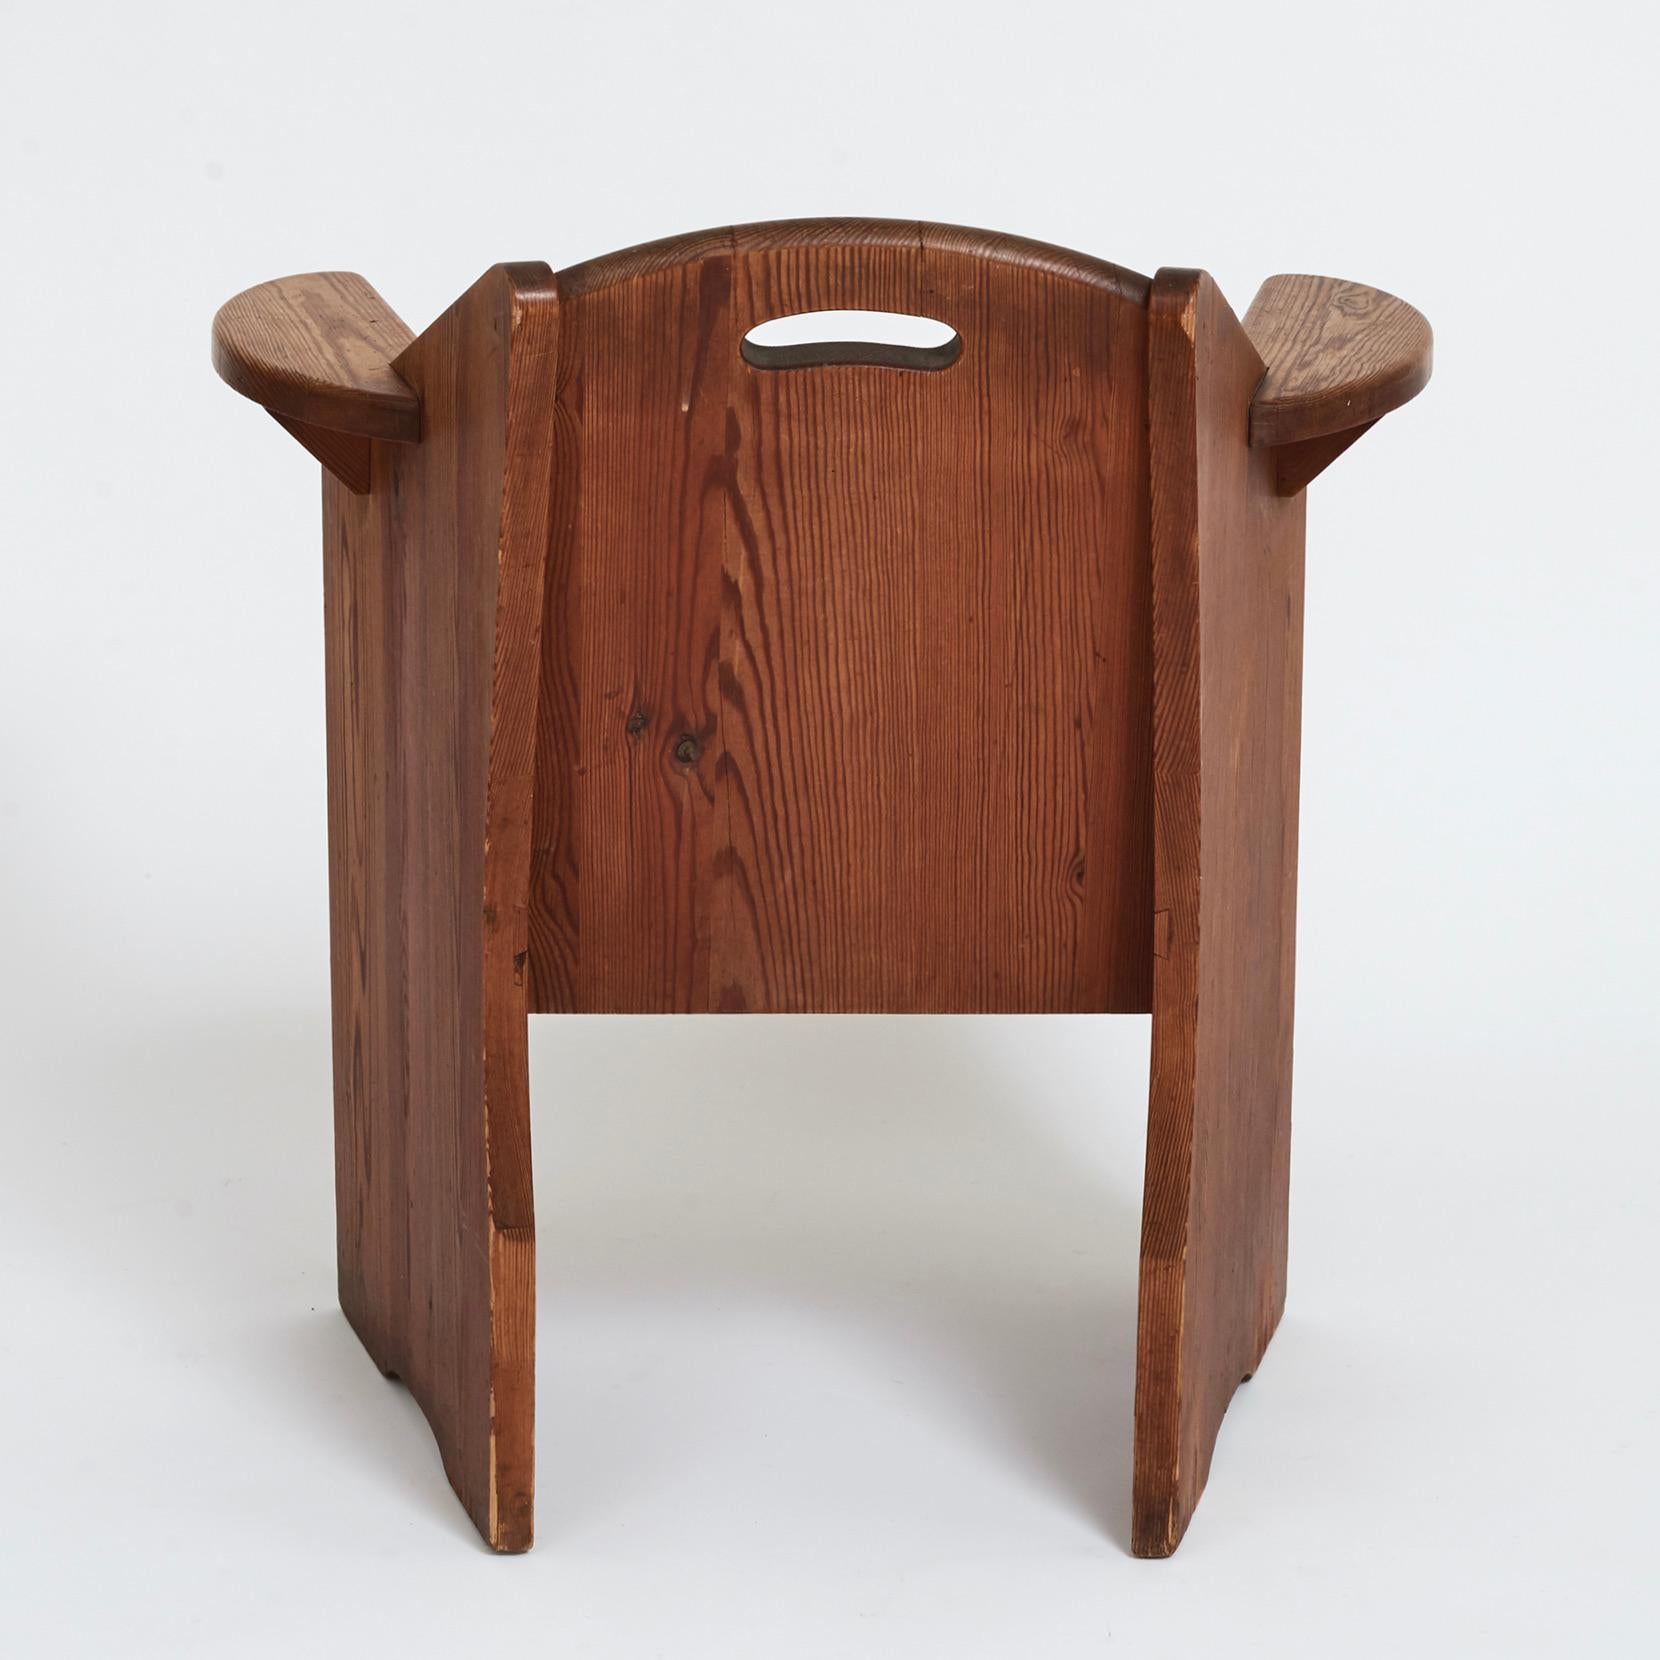 A Swedish solid fir armchair in the Modernist manner, attributed to Hjorth's design and the 